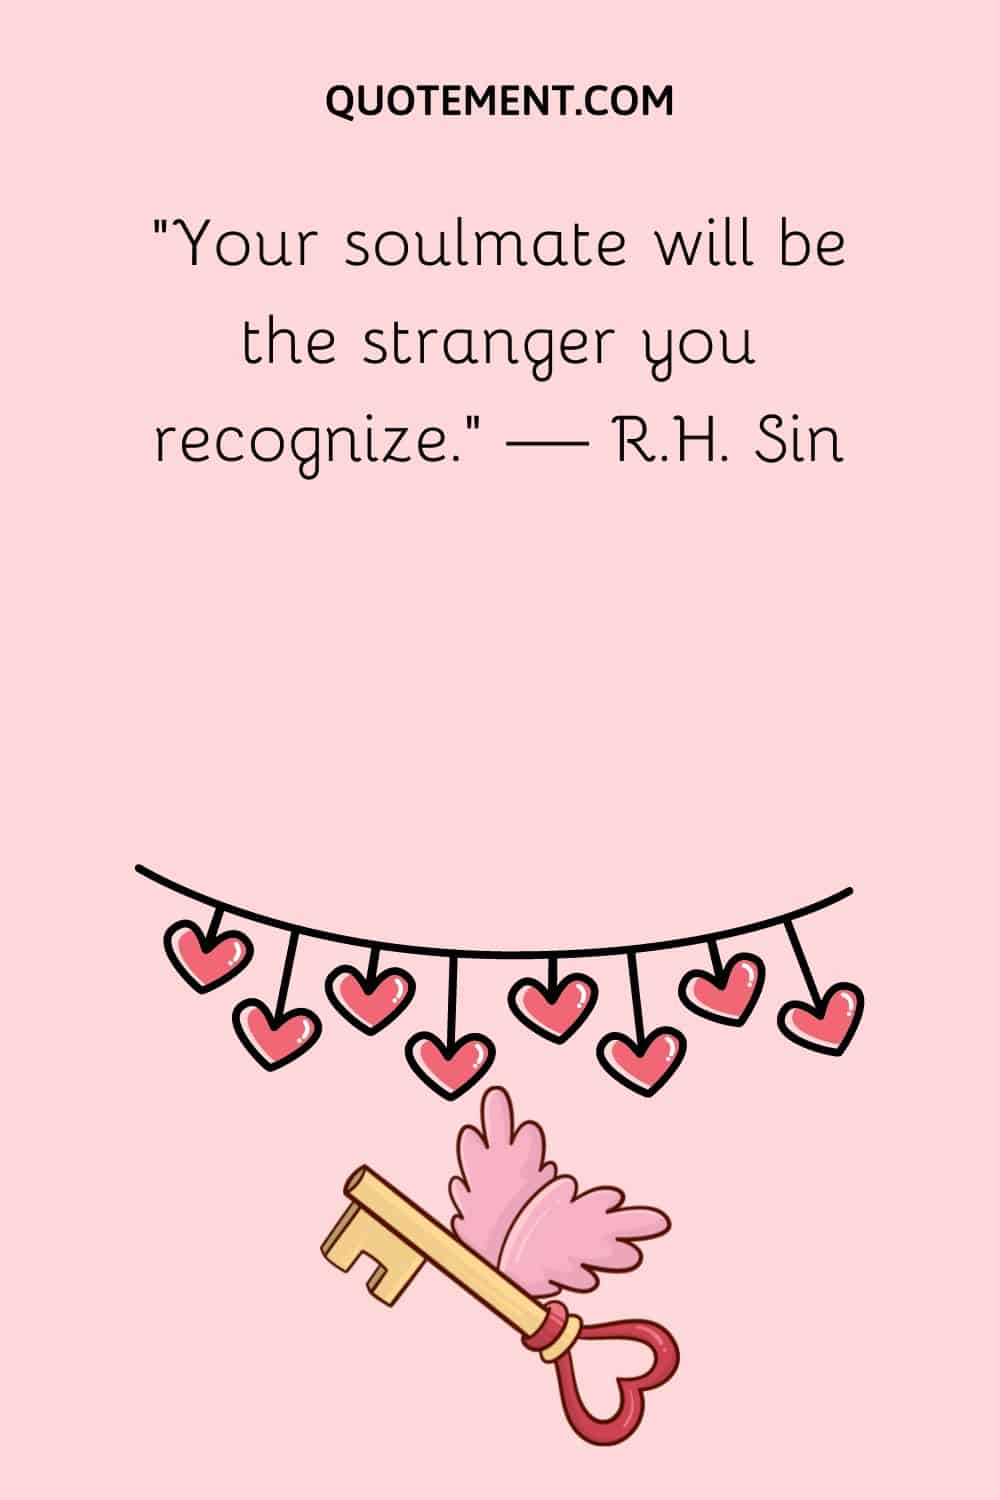 “Your soulmate will be the stranger you recognize.” — R.H. Sin